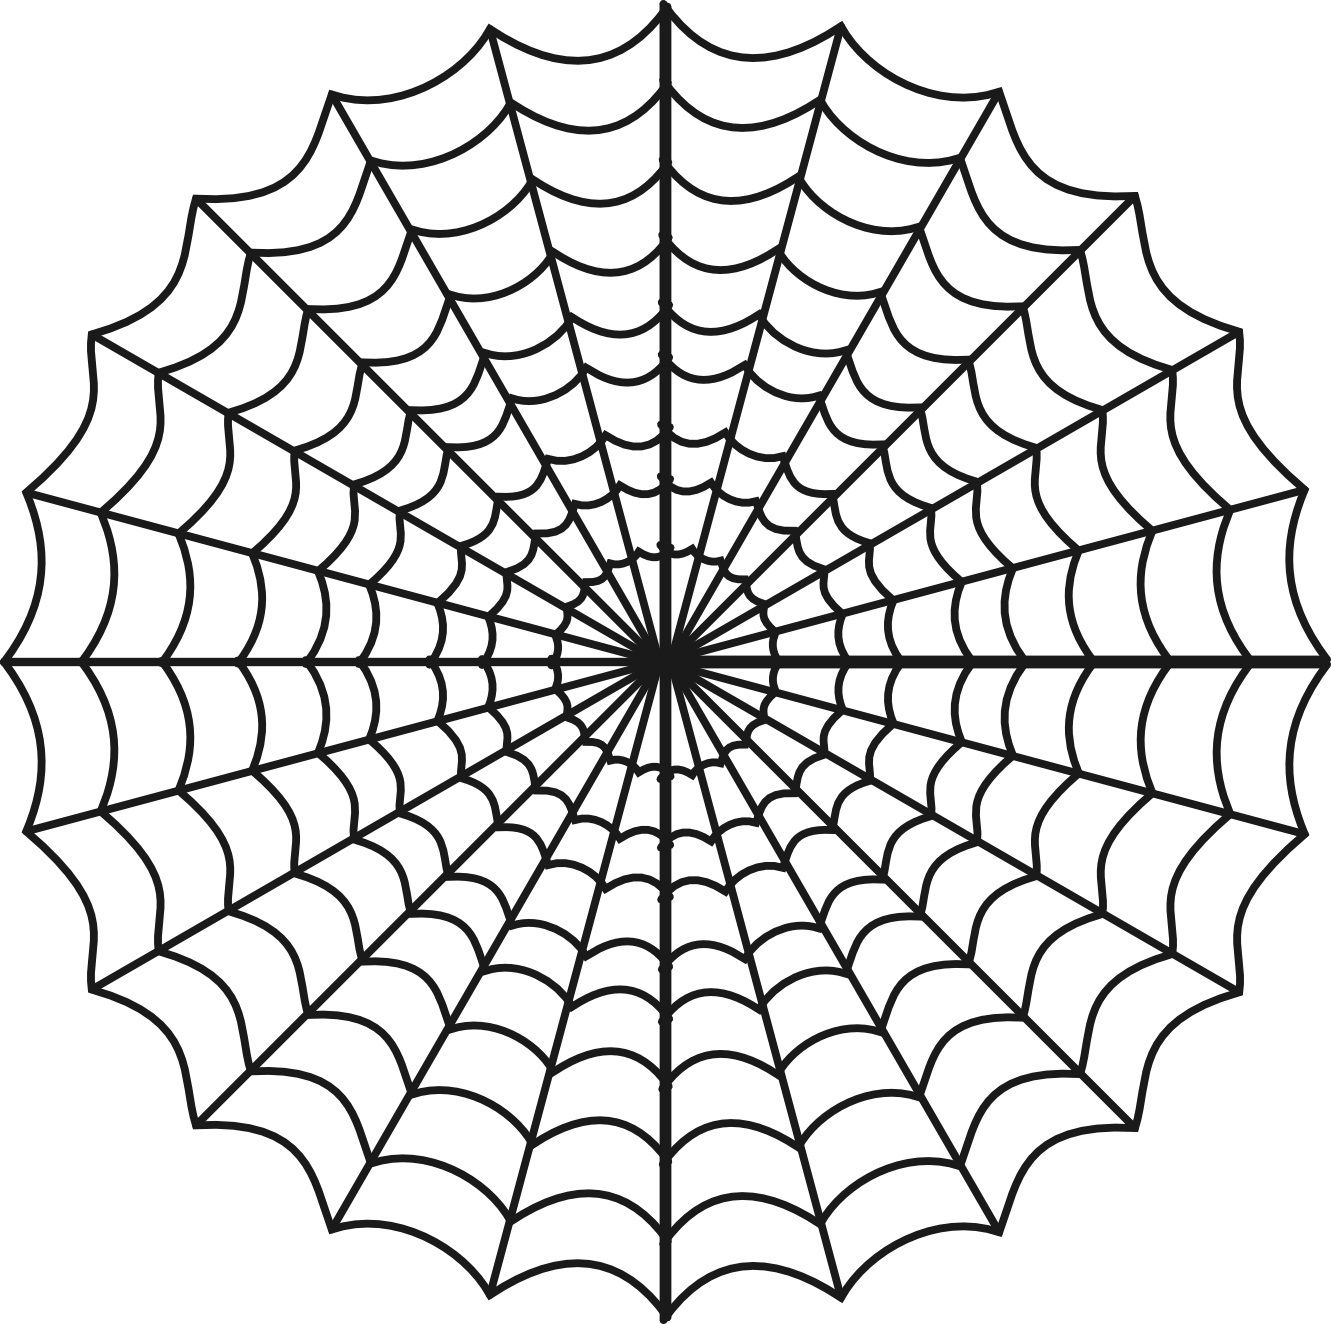 Free Printable Spider Web Coloring Pages For Kids Inside | Preschool - Free Printable Spider Web